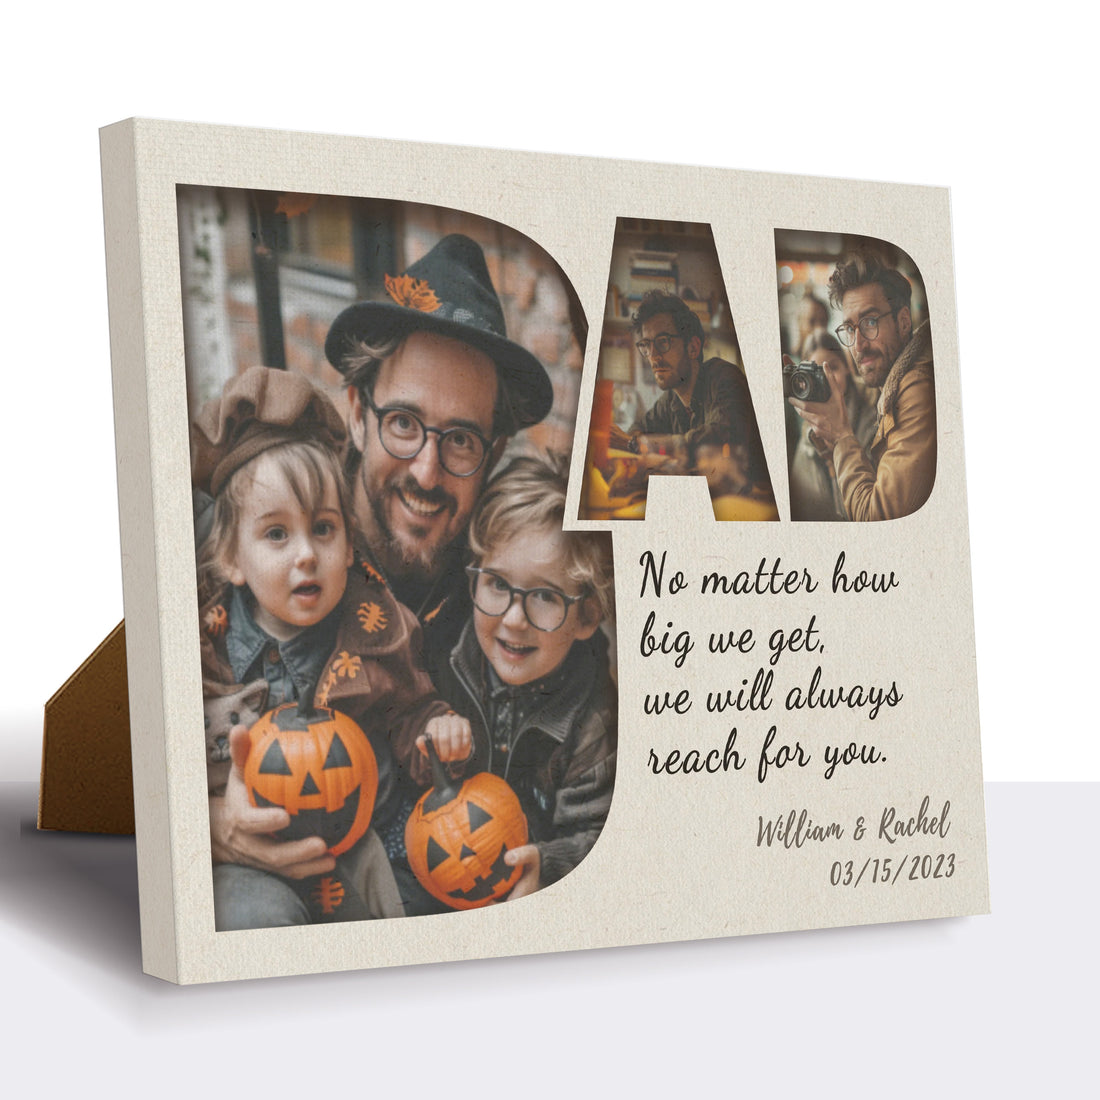 Dad, No Matter How - Personalized Gratitude Print